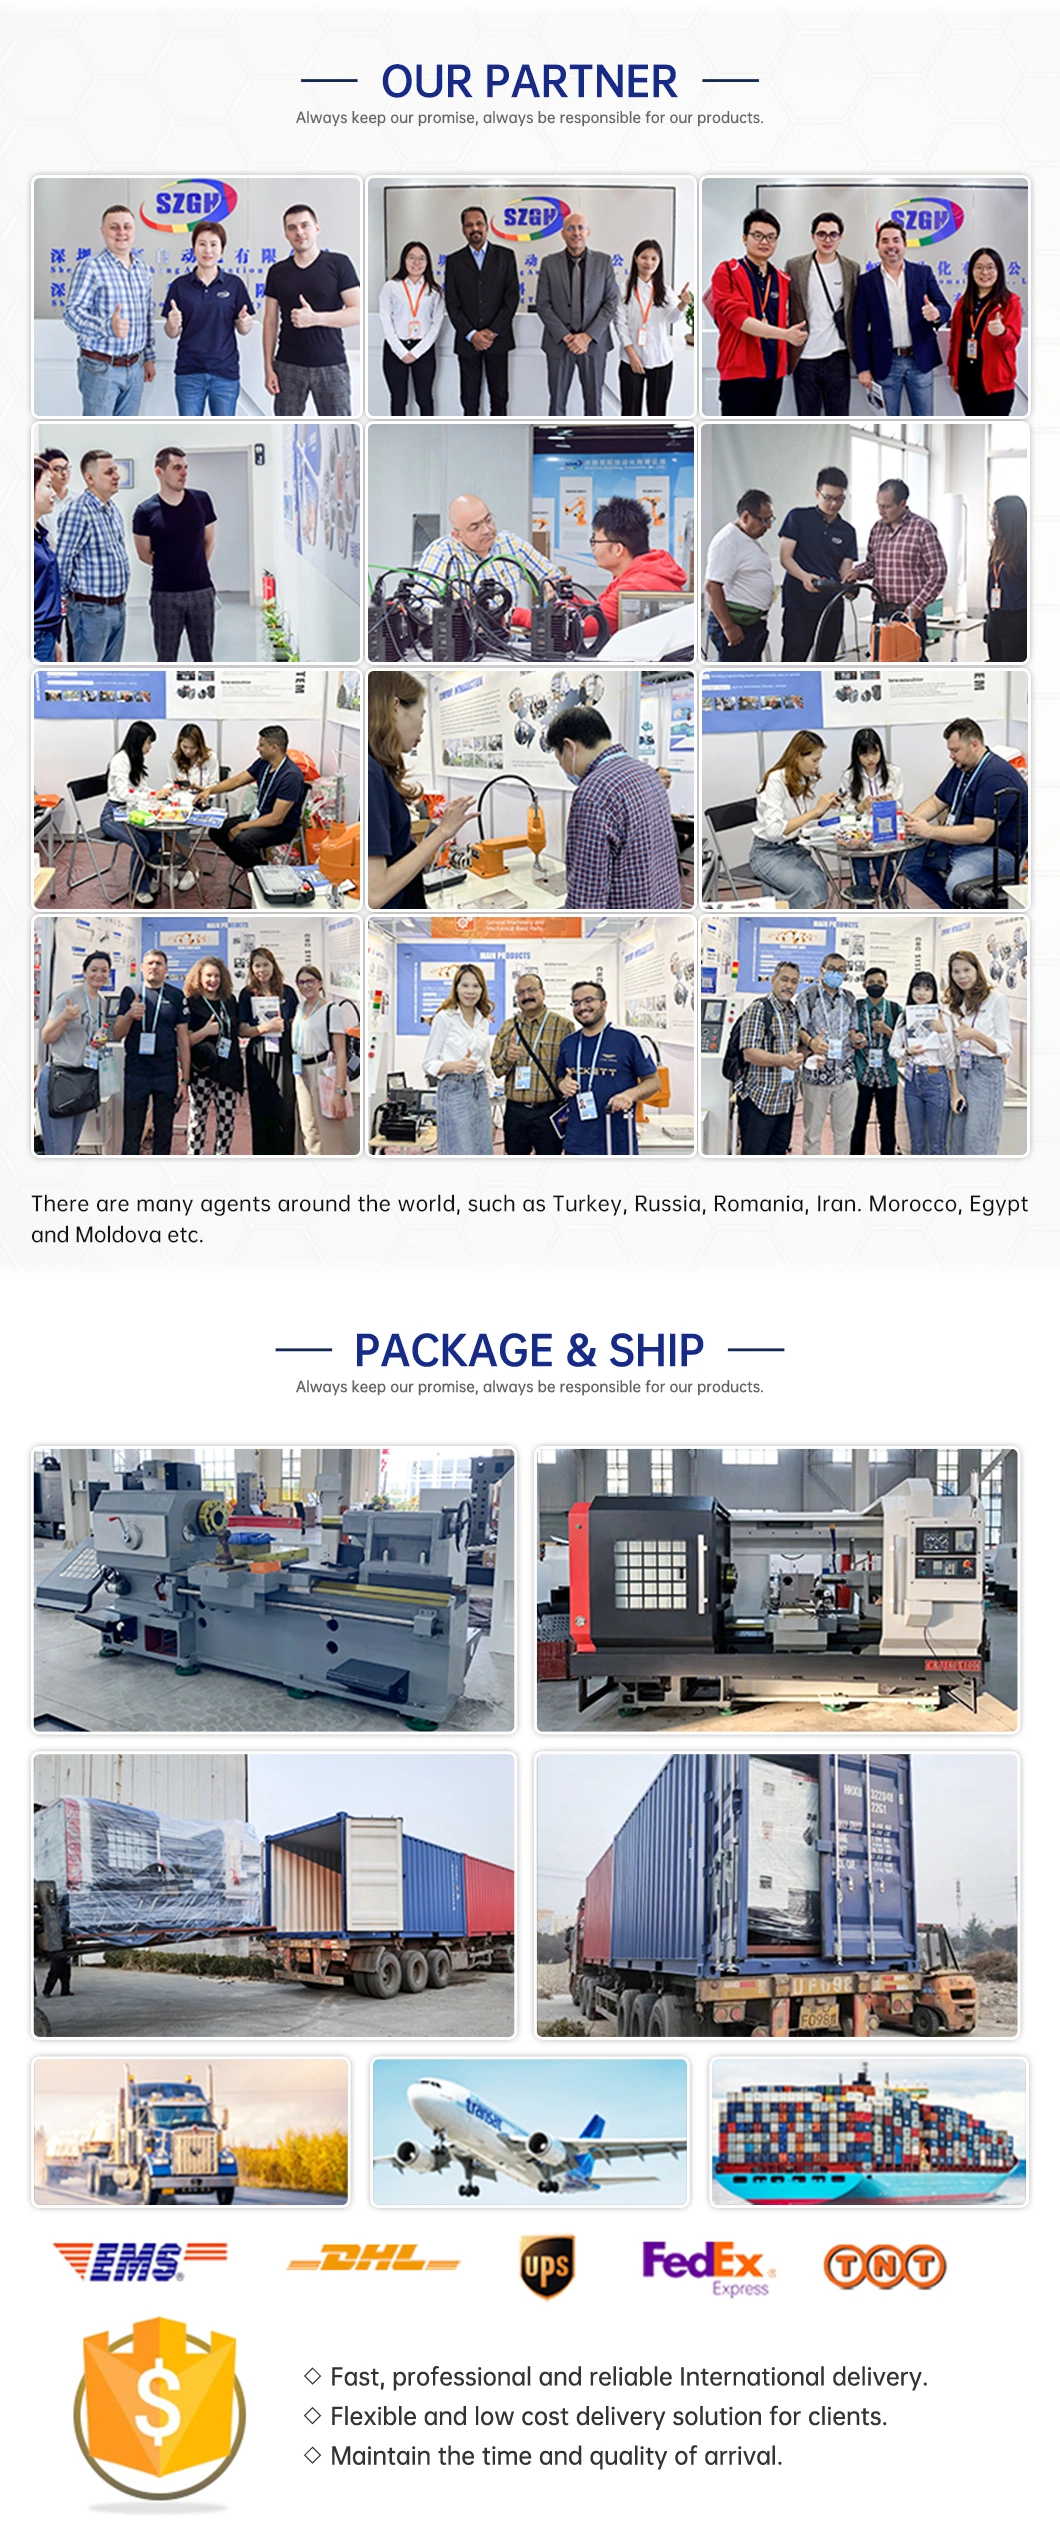 Dual-Spindle Interpolating Y-Axis Slant Bed Metal Automatic CNC Lathe with 5-Axis CNC Milling and Turning Compound Machine for Dental Implant